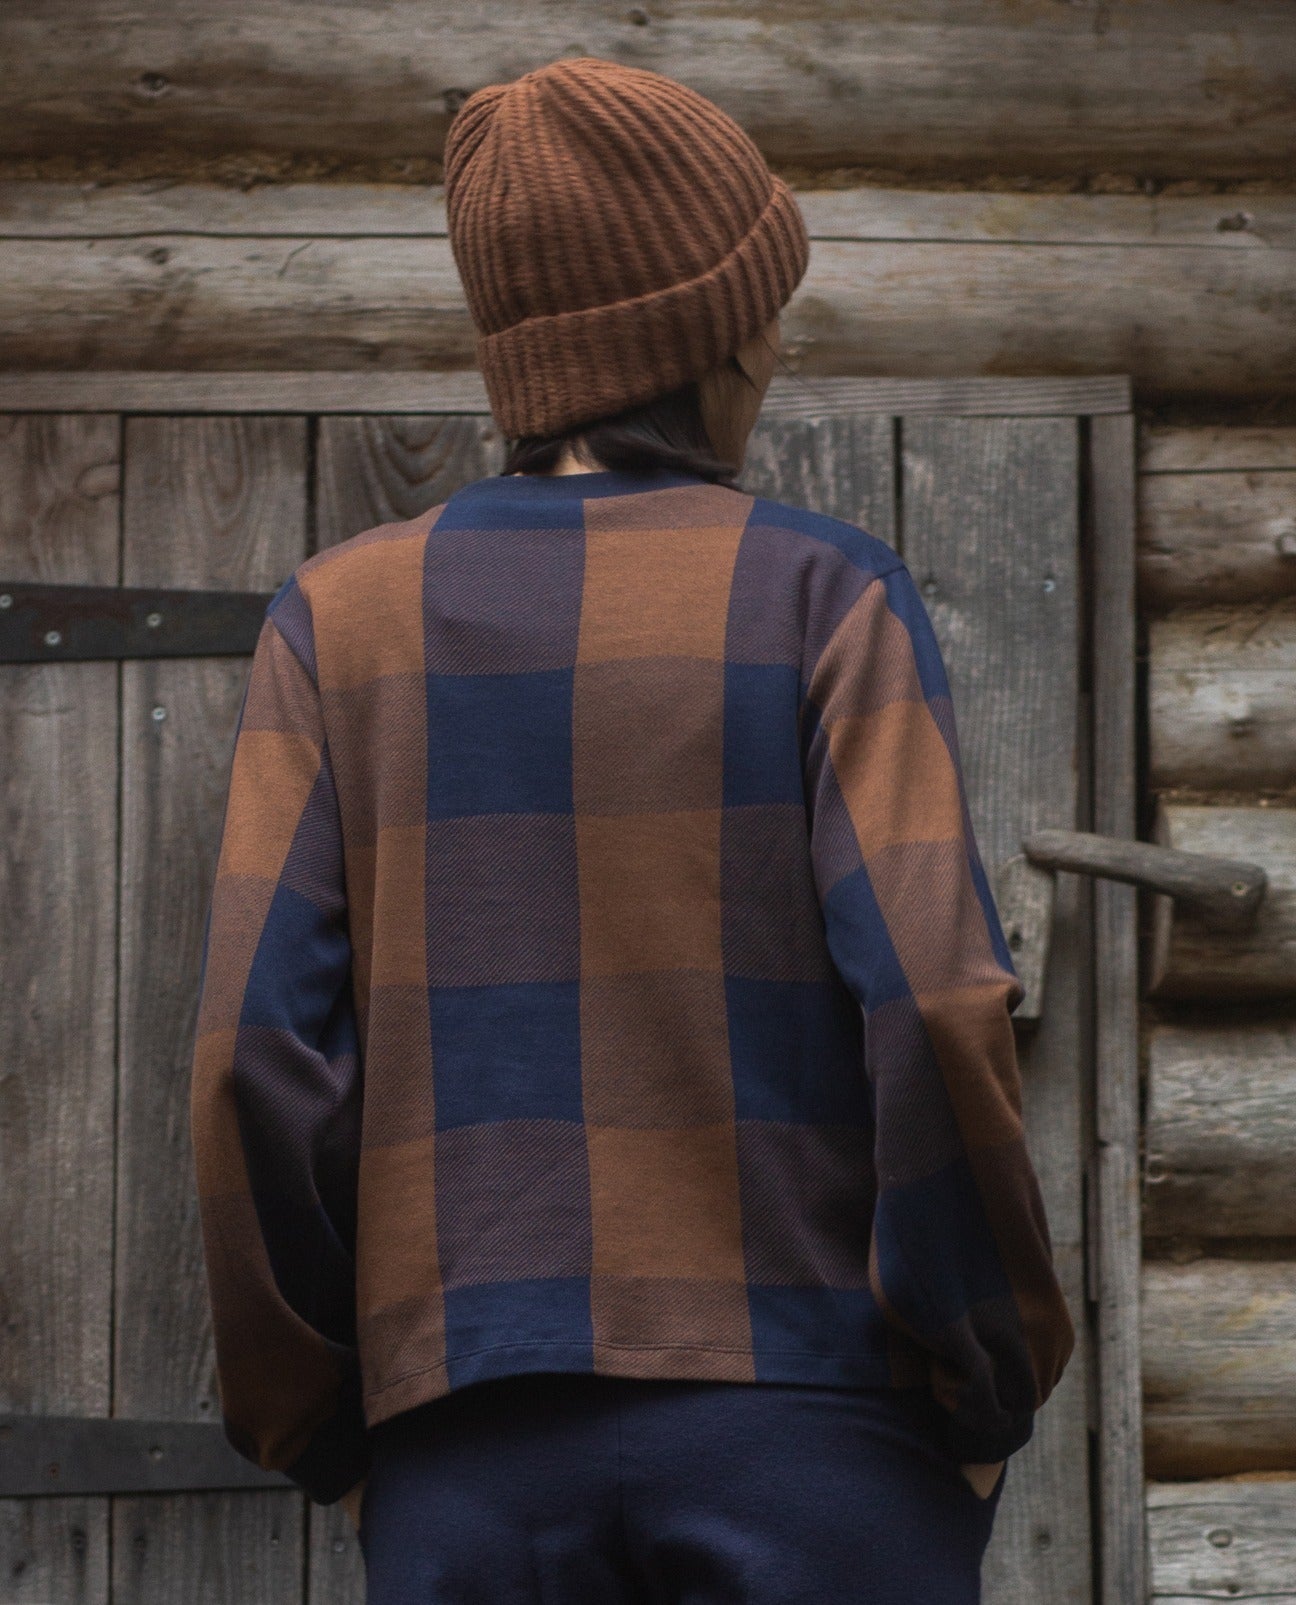 Sierra-Cay Knitted Check Top in Walnut and Night Sky Check